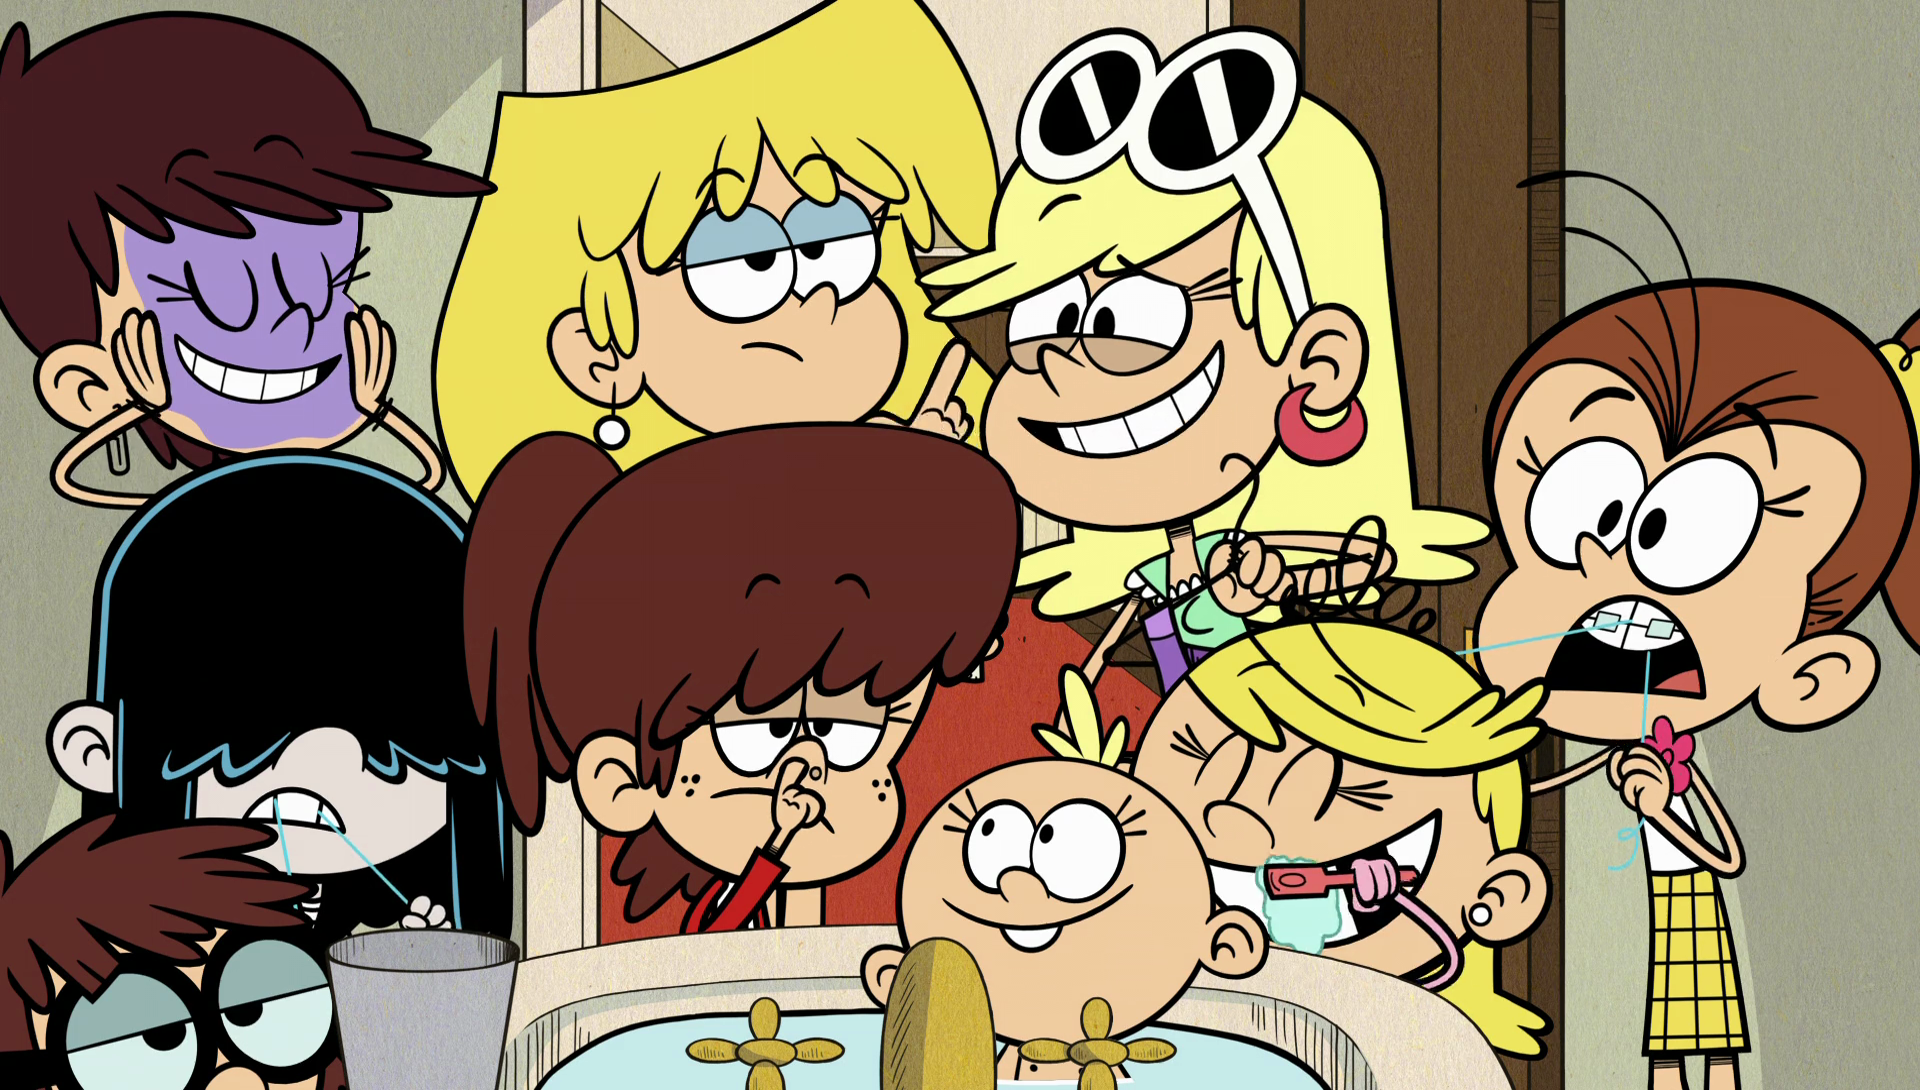 Image S2E10A Getting ready for bed png The Loud House 